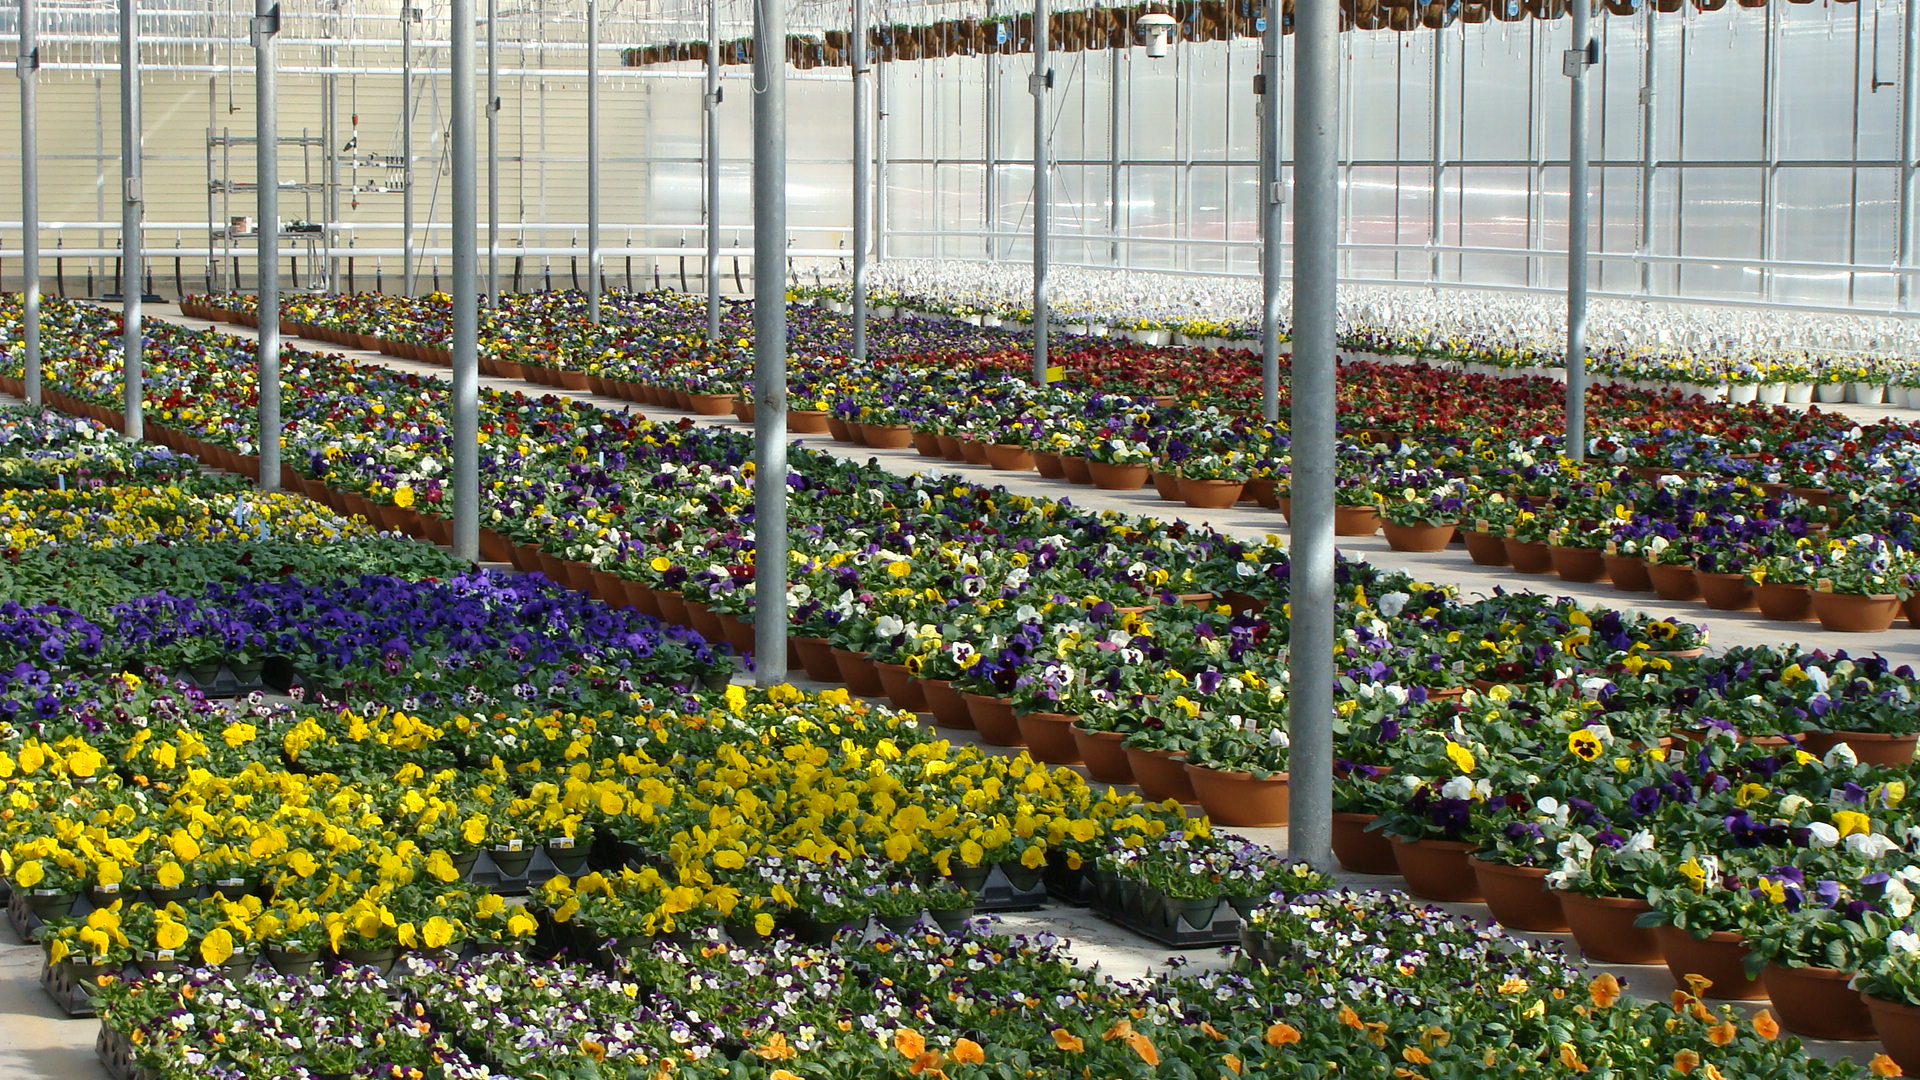 Our growing greenhouse full of pansies